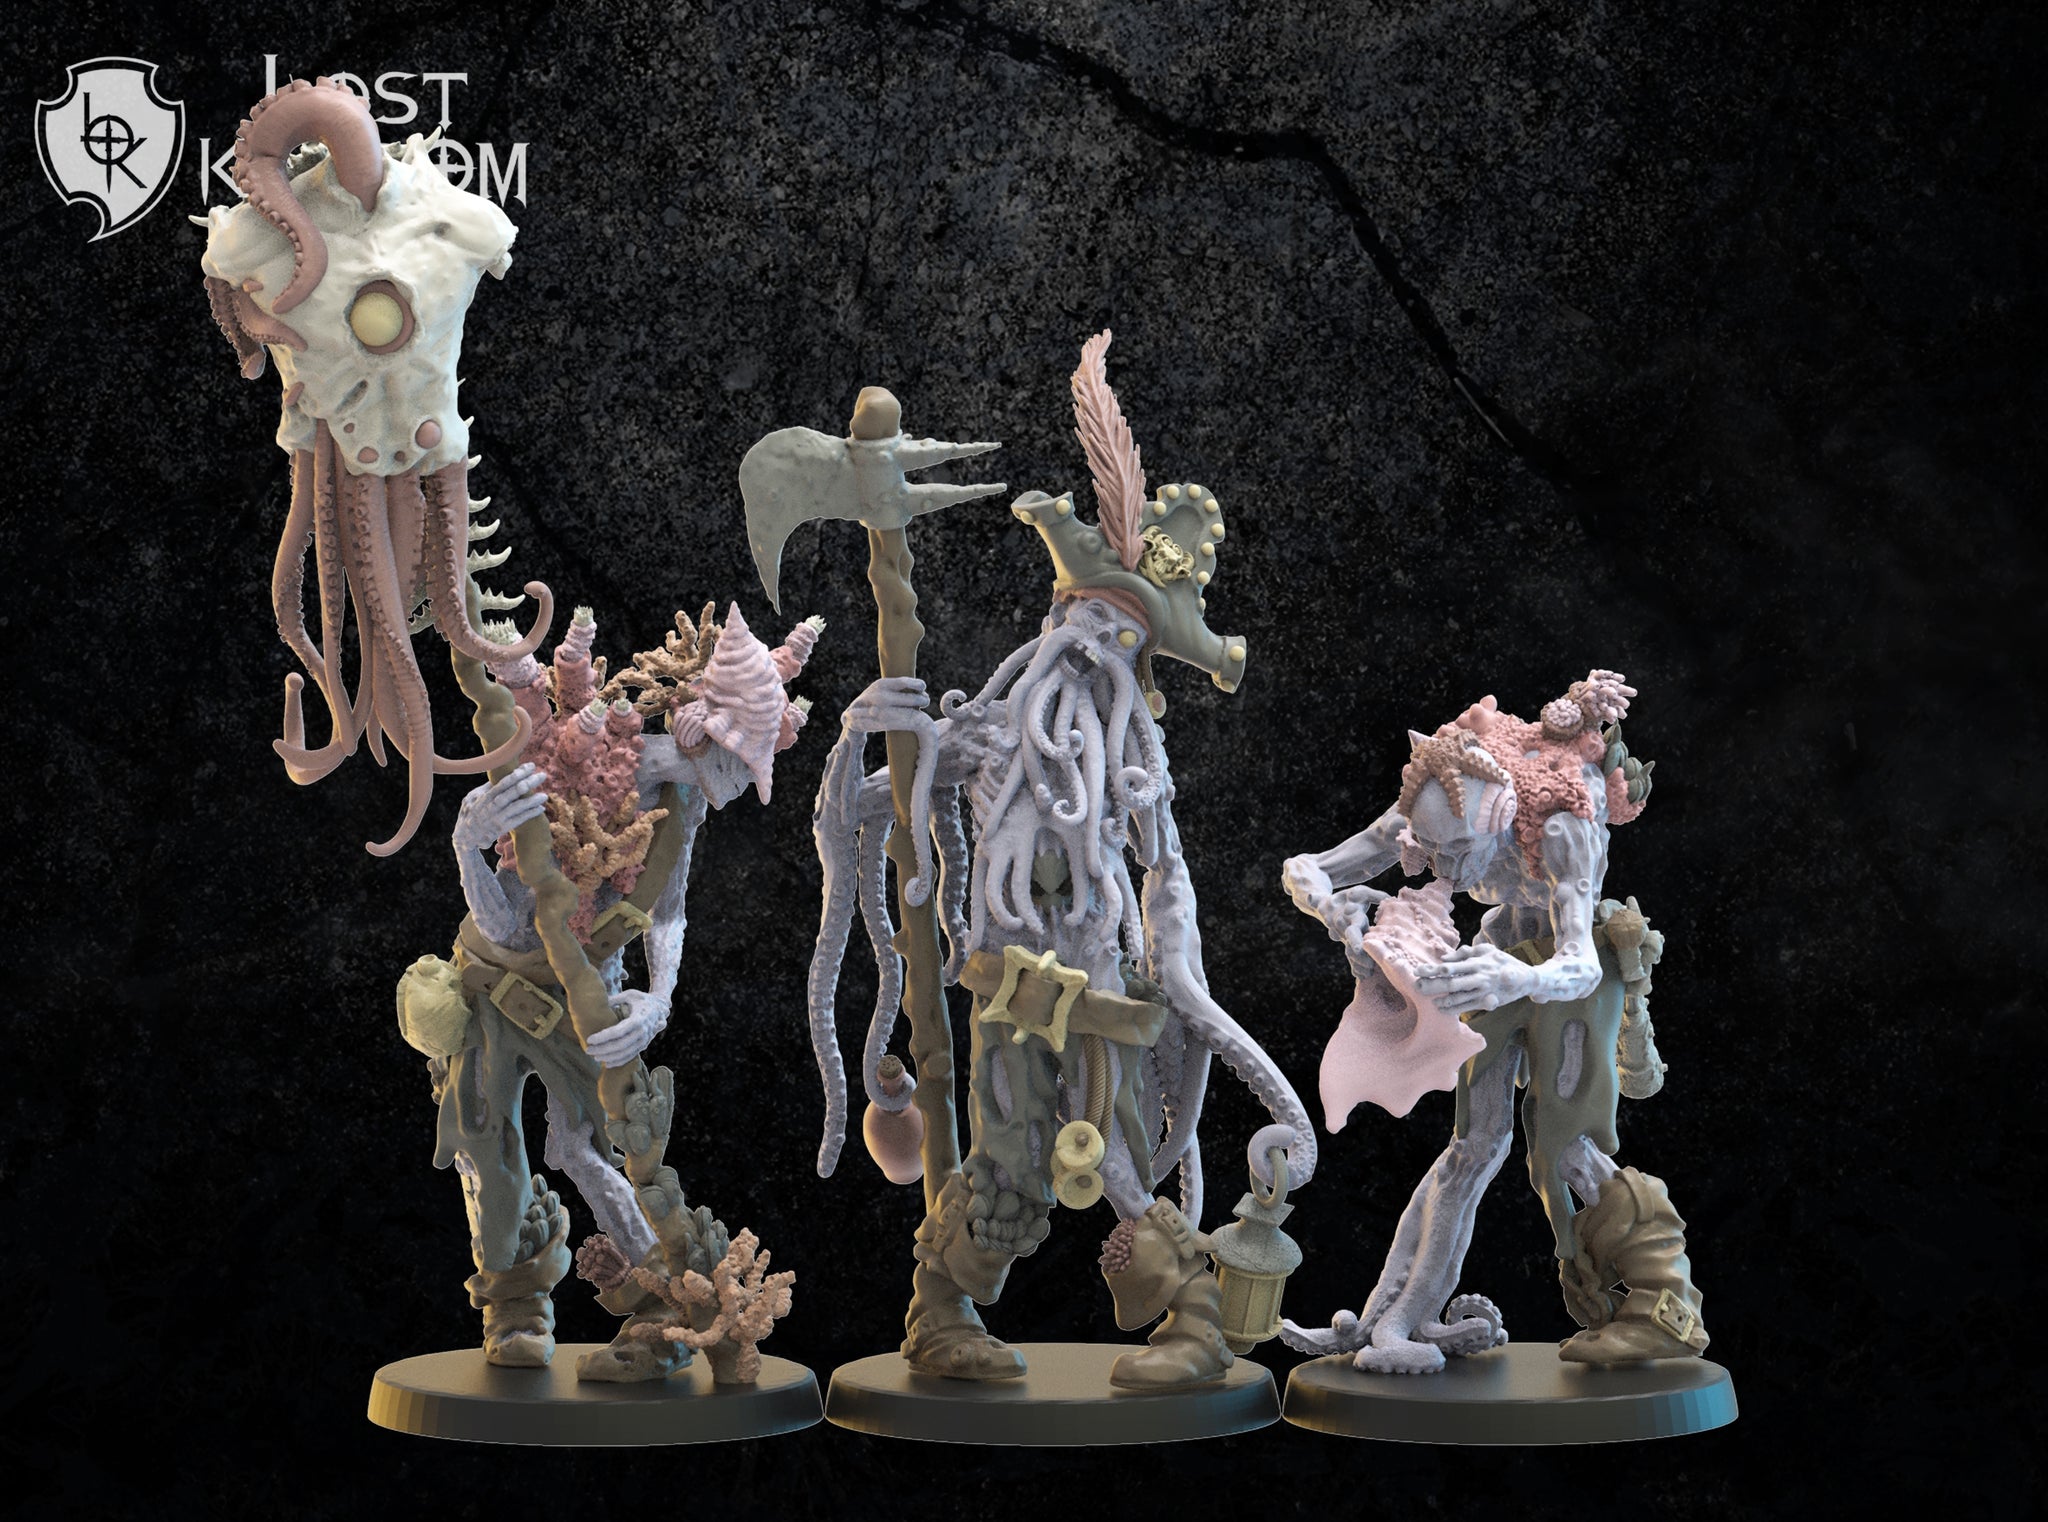 Undead Pirate Deep Zombies Command Group: Undead Misty b | Tabletop Heaven